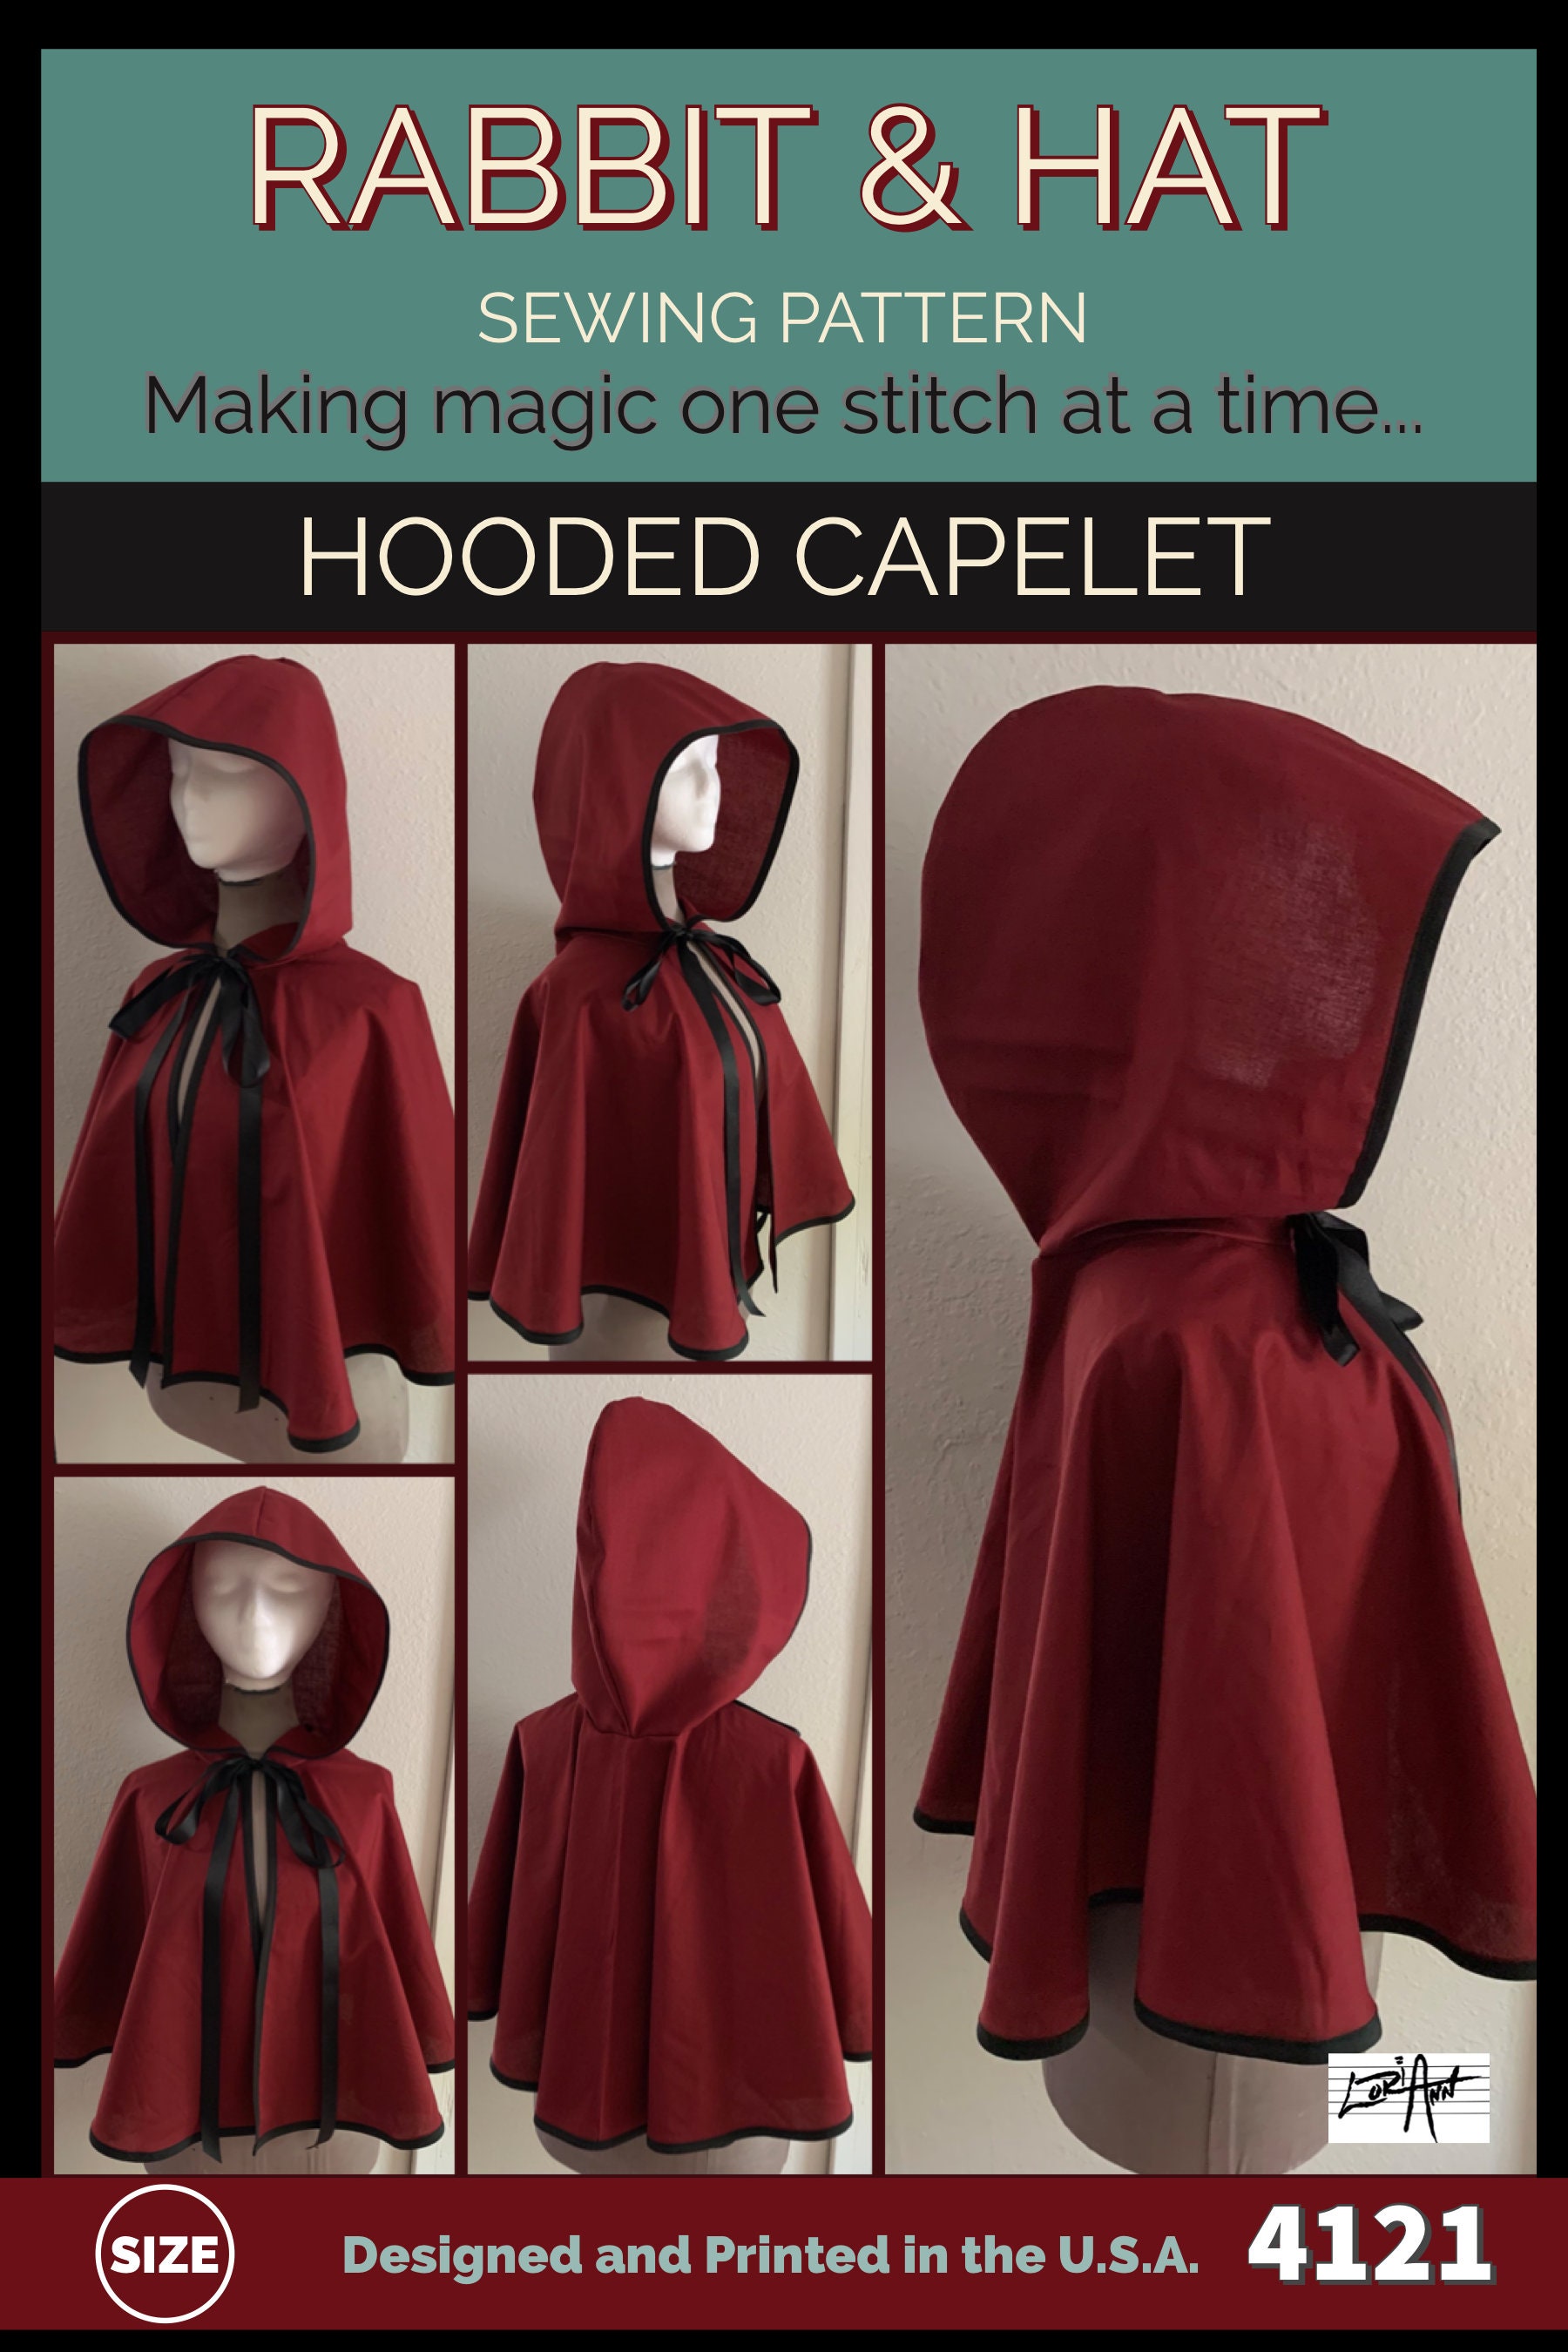 PDF Hooded Capelet Short Cape 4121 New Rabbit and Hat Sewing - Etsy